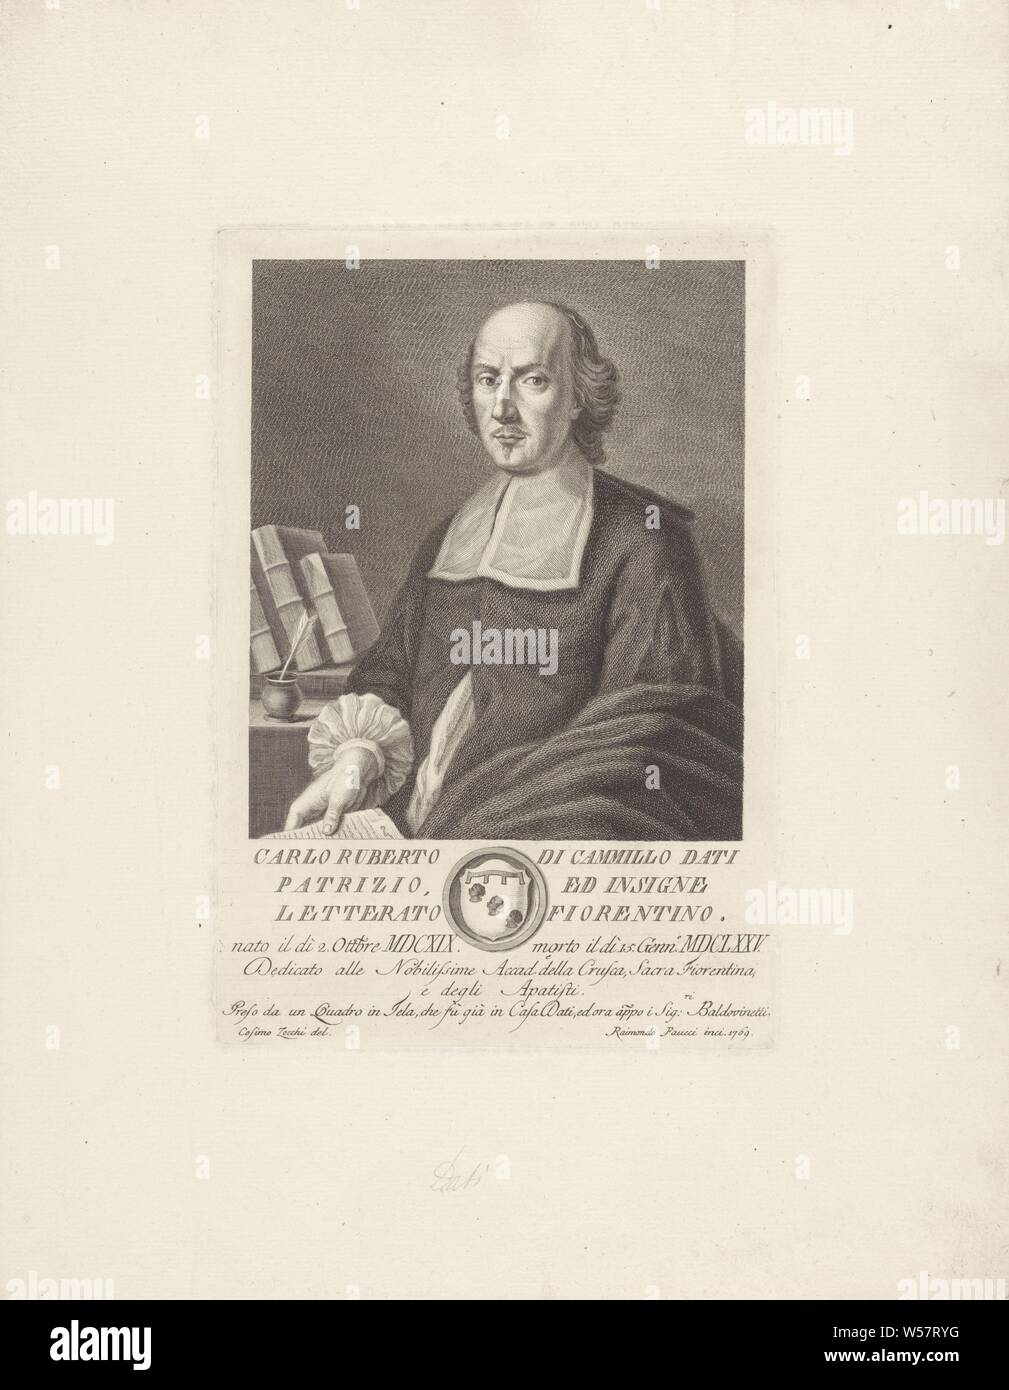 Portrait of Carlo Roberto Dati Portraits of famous Italians with a coat of arms in a lower margin (series title), historical persons, Carlo Roberto Dati, Raimondo Faucci (mentioned on object), Italy, 1769, paper, engraving, h 294 mm × w 202 mm Stock Photo